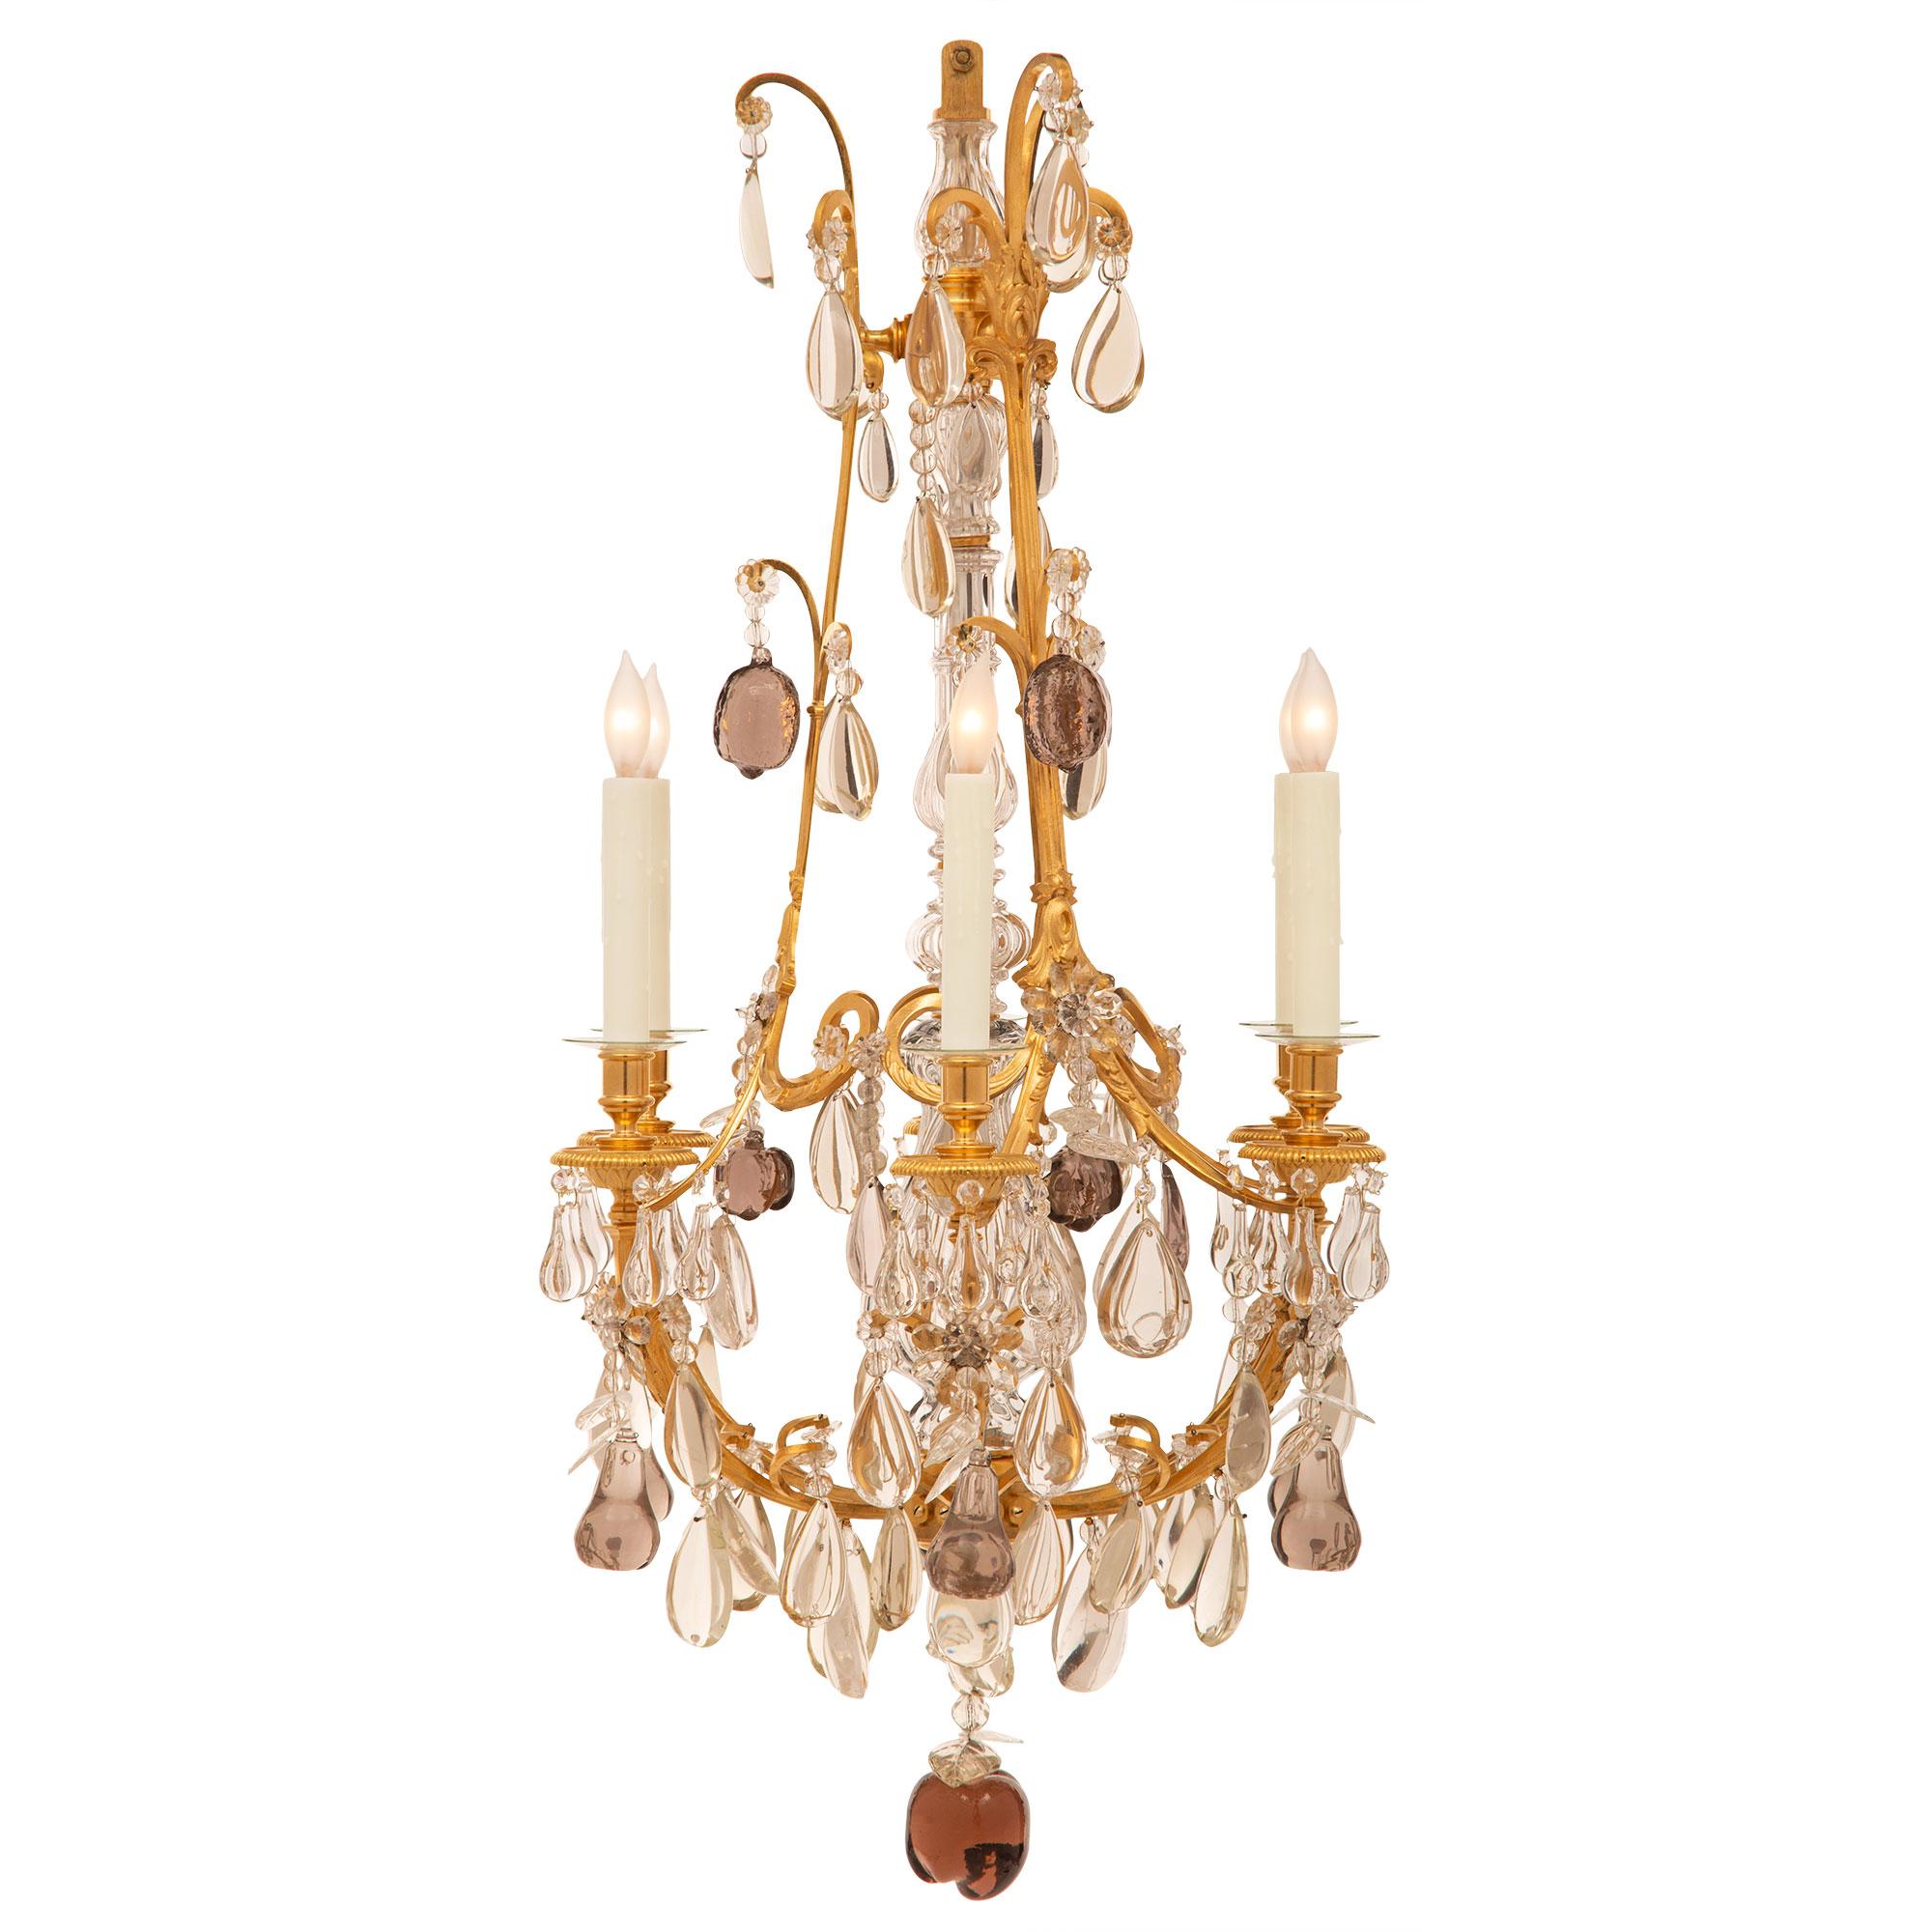 A striking and most decorative French 19th century Louis XVI st. Baccarat crystal, colored crystal, and ormolu chandelier. The six arm chandelier is centered by a beautiful and very unique caramel colored apple shaped crystal pedant with lovely